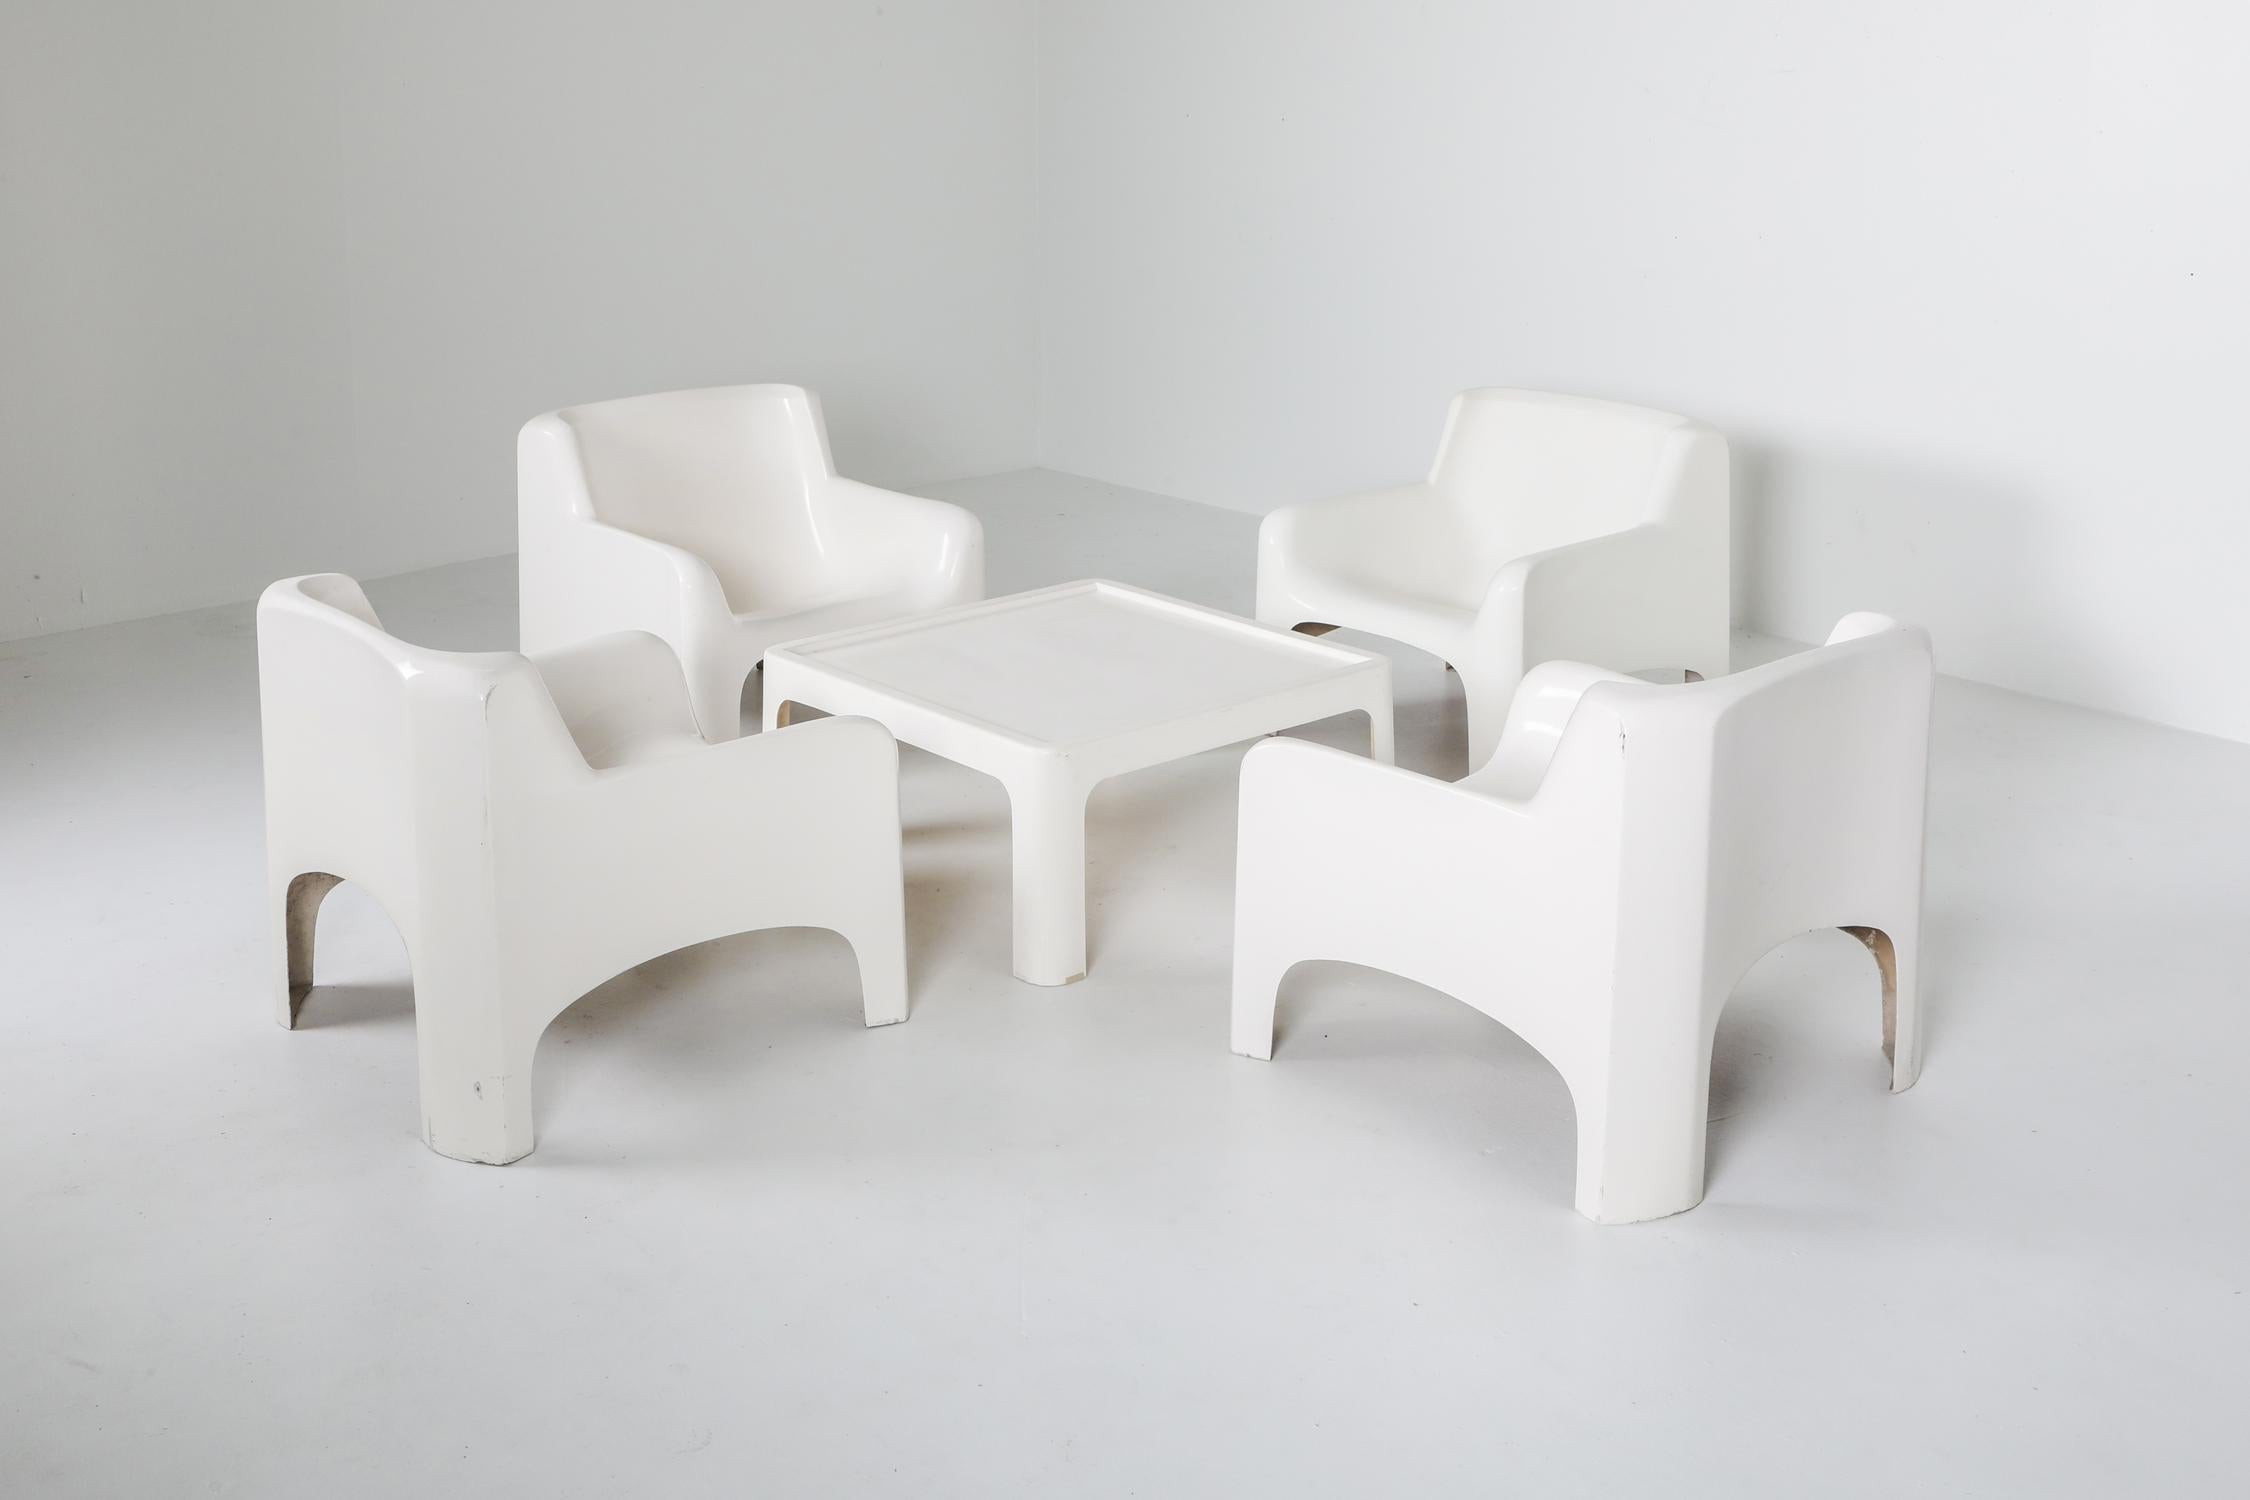 Carlo Bartali, model 'Solar', Arflex, Italy 1965, set of four armchairs with table

Fiberglass and polyester resin with lacquer finish
These elegant lounge chairs by Carlo Bartoli were made in Italy by Arflex and imported into the US by Stendig.